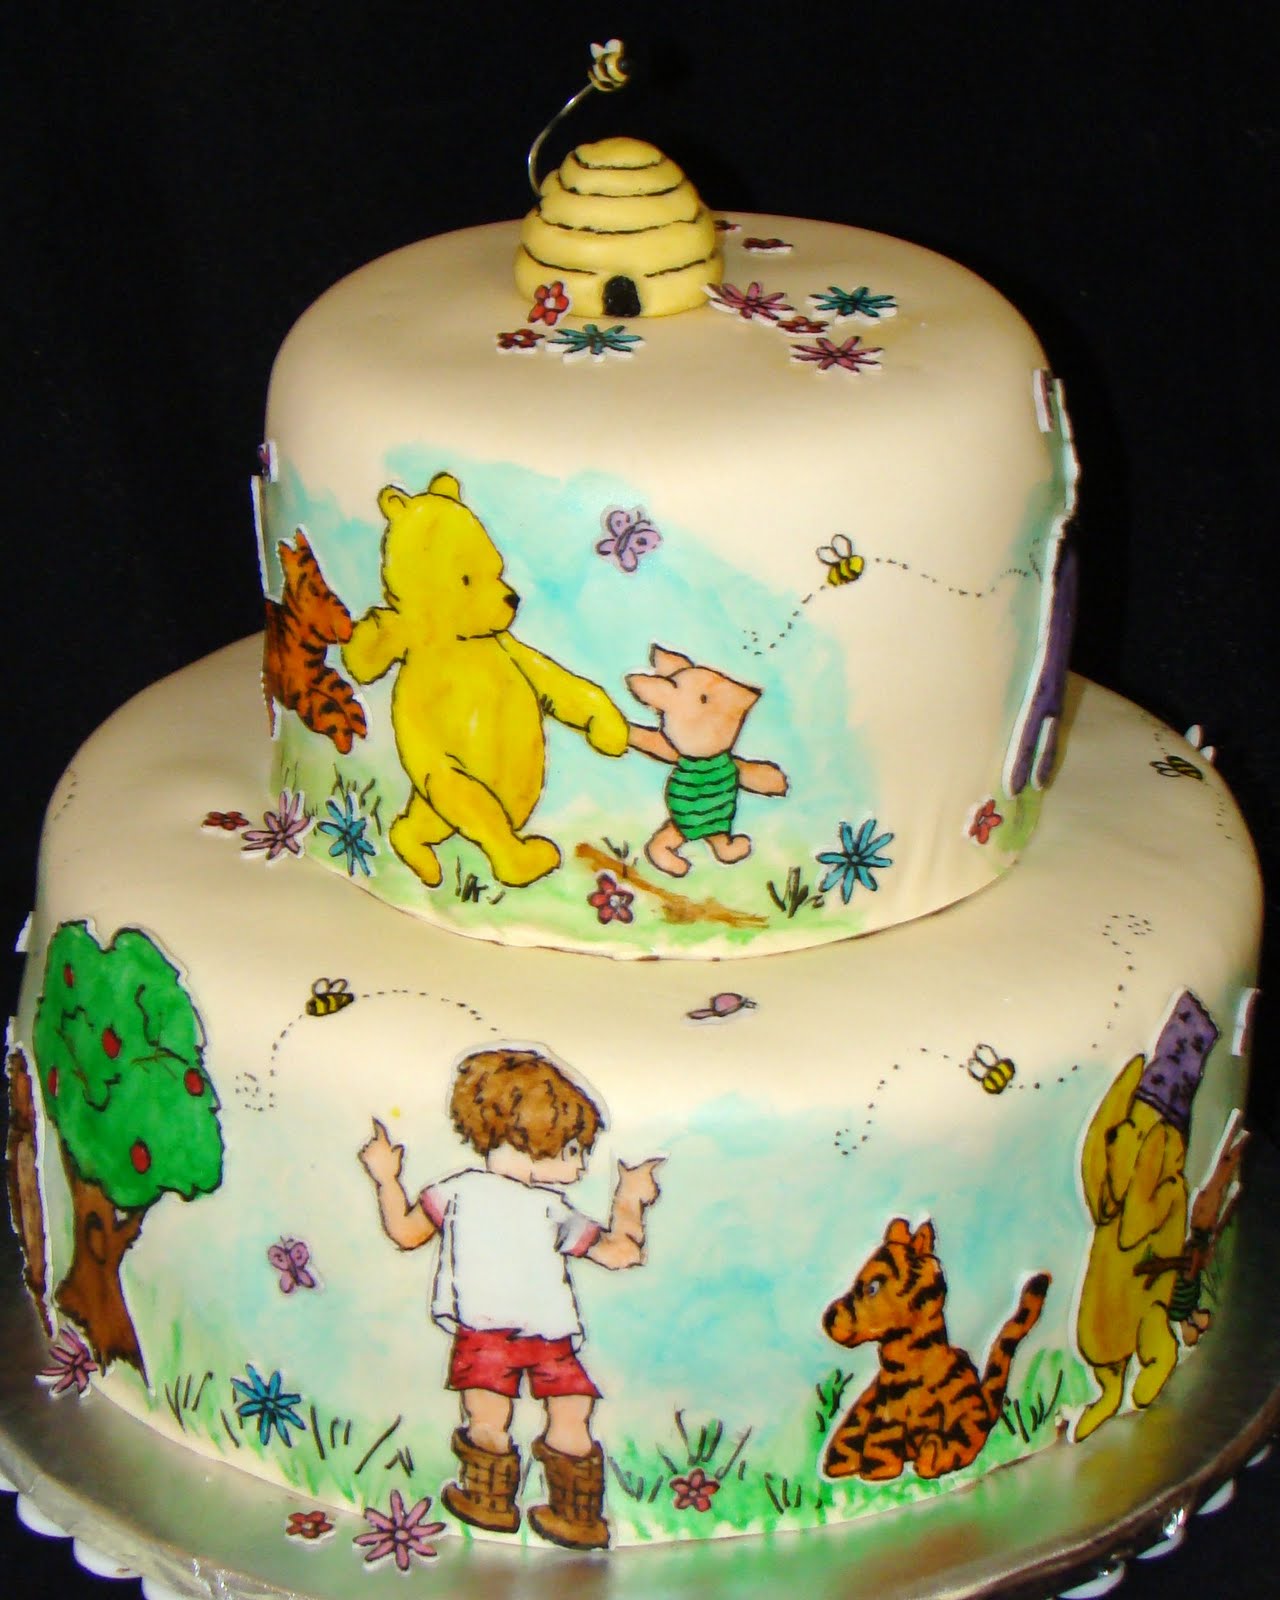 Layers of Love: Classic Winnie the Pooh cake